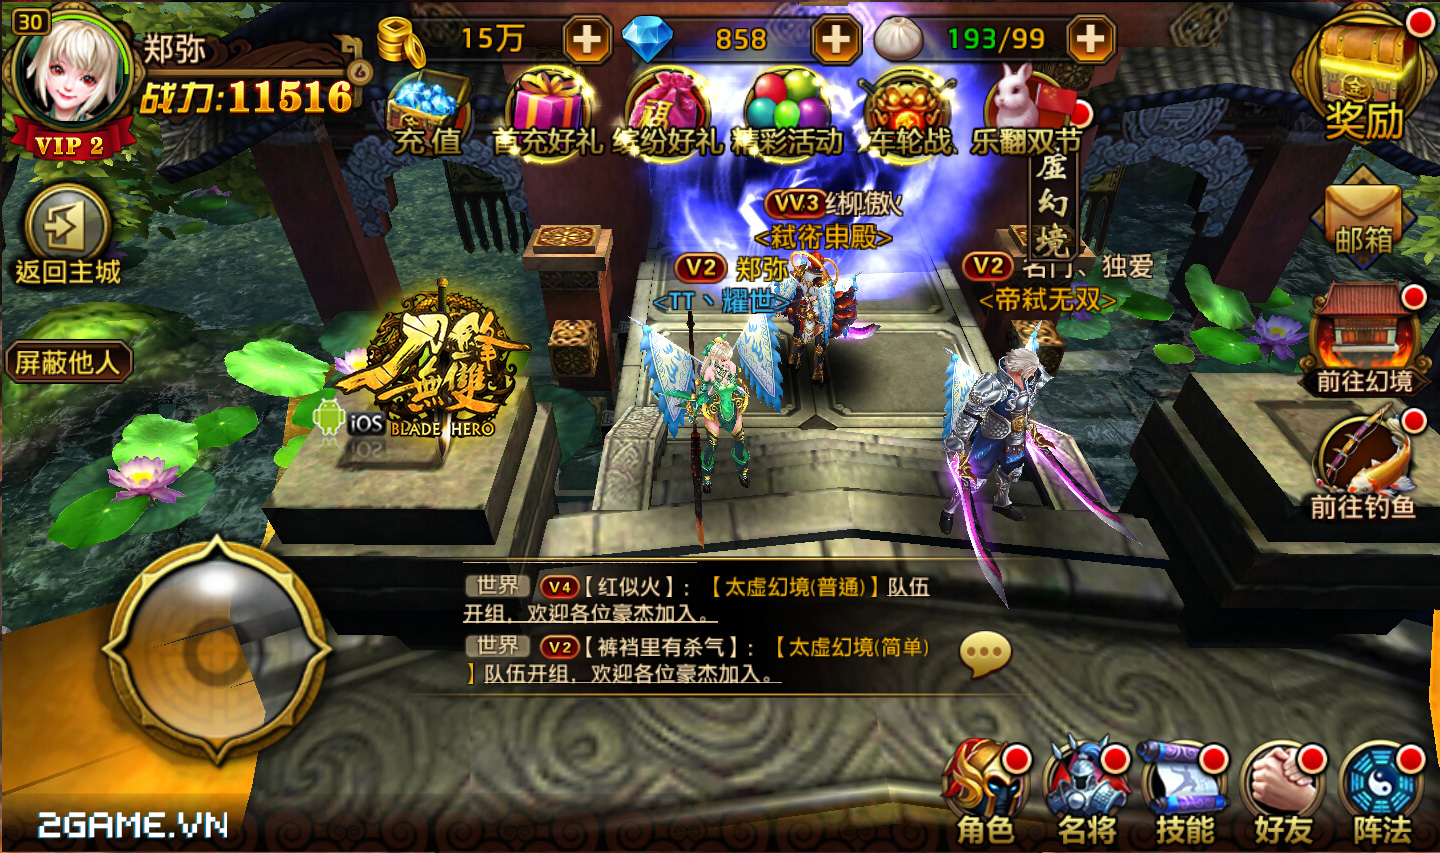 2game-dao-phong-vo-song-3d-mobile-6.jpg (1440×853)